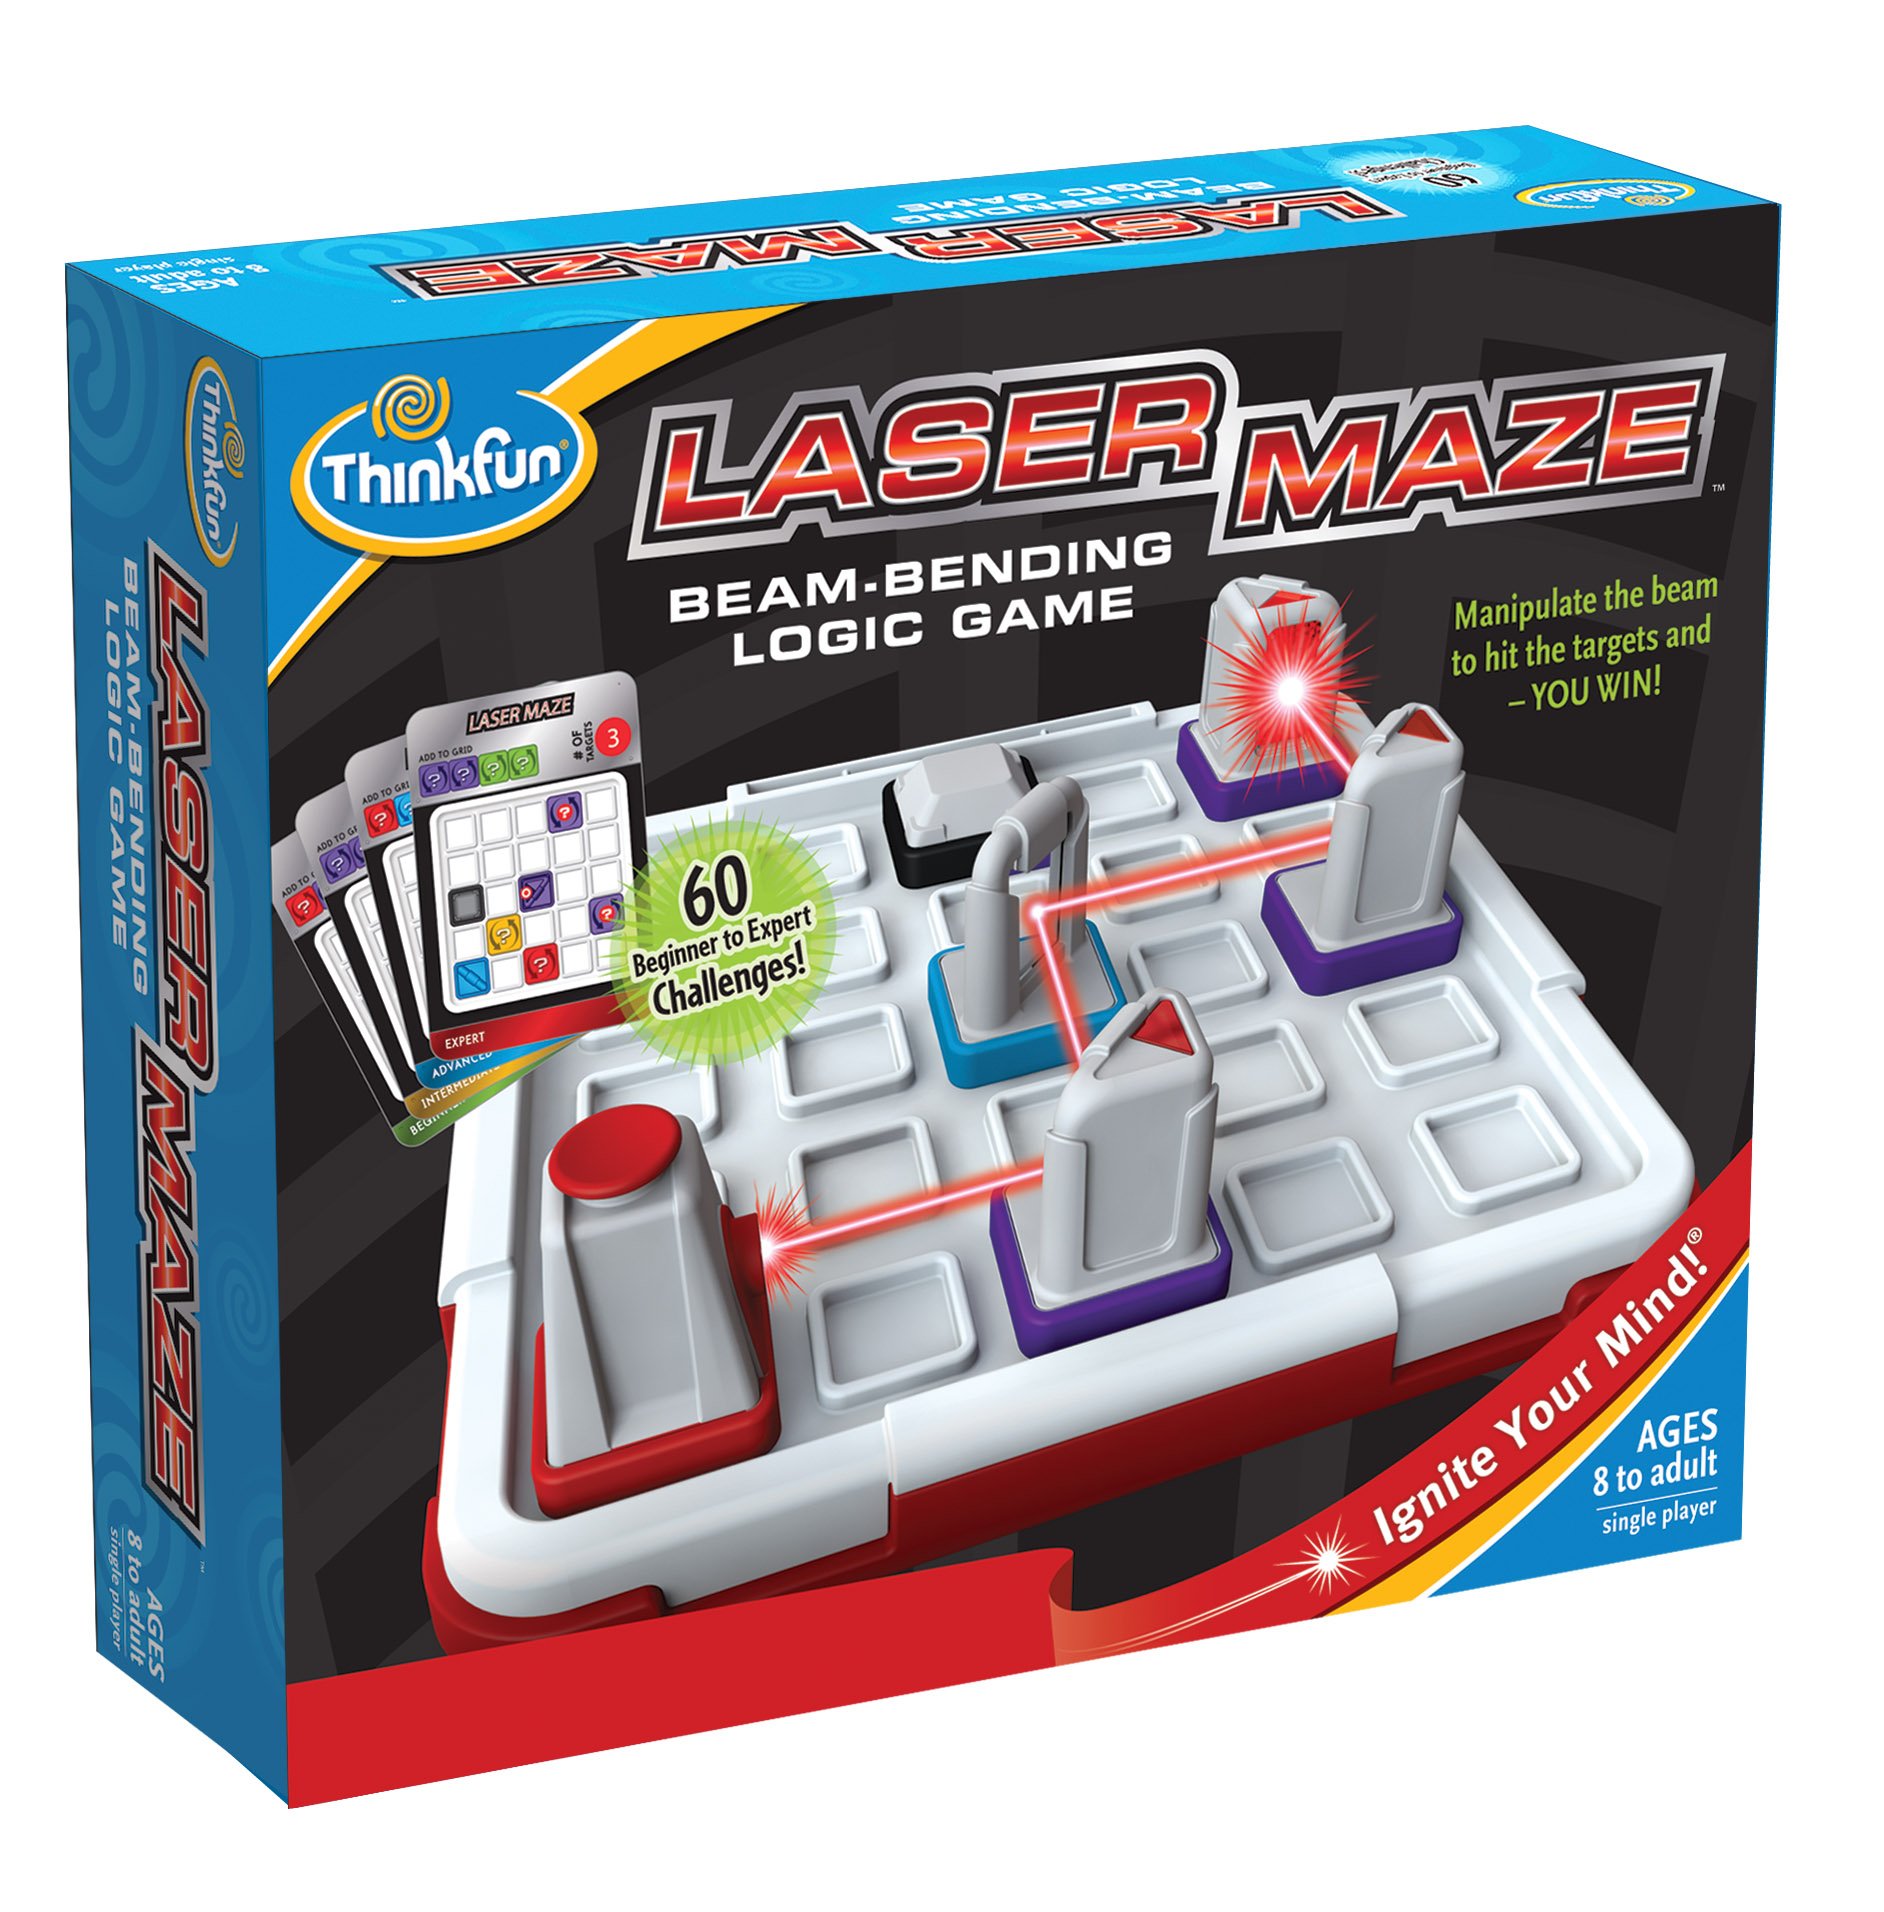 Think Fun Laser Maze (Class 1) Brain Game and STEM Toy for Boys and Girls Age 8 and Up – Award Winning and Mind Challenging Game for Kids (44001014)